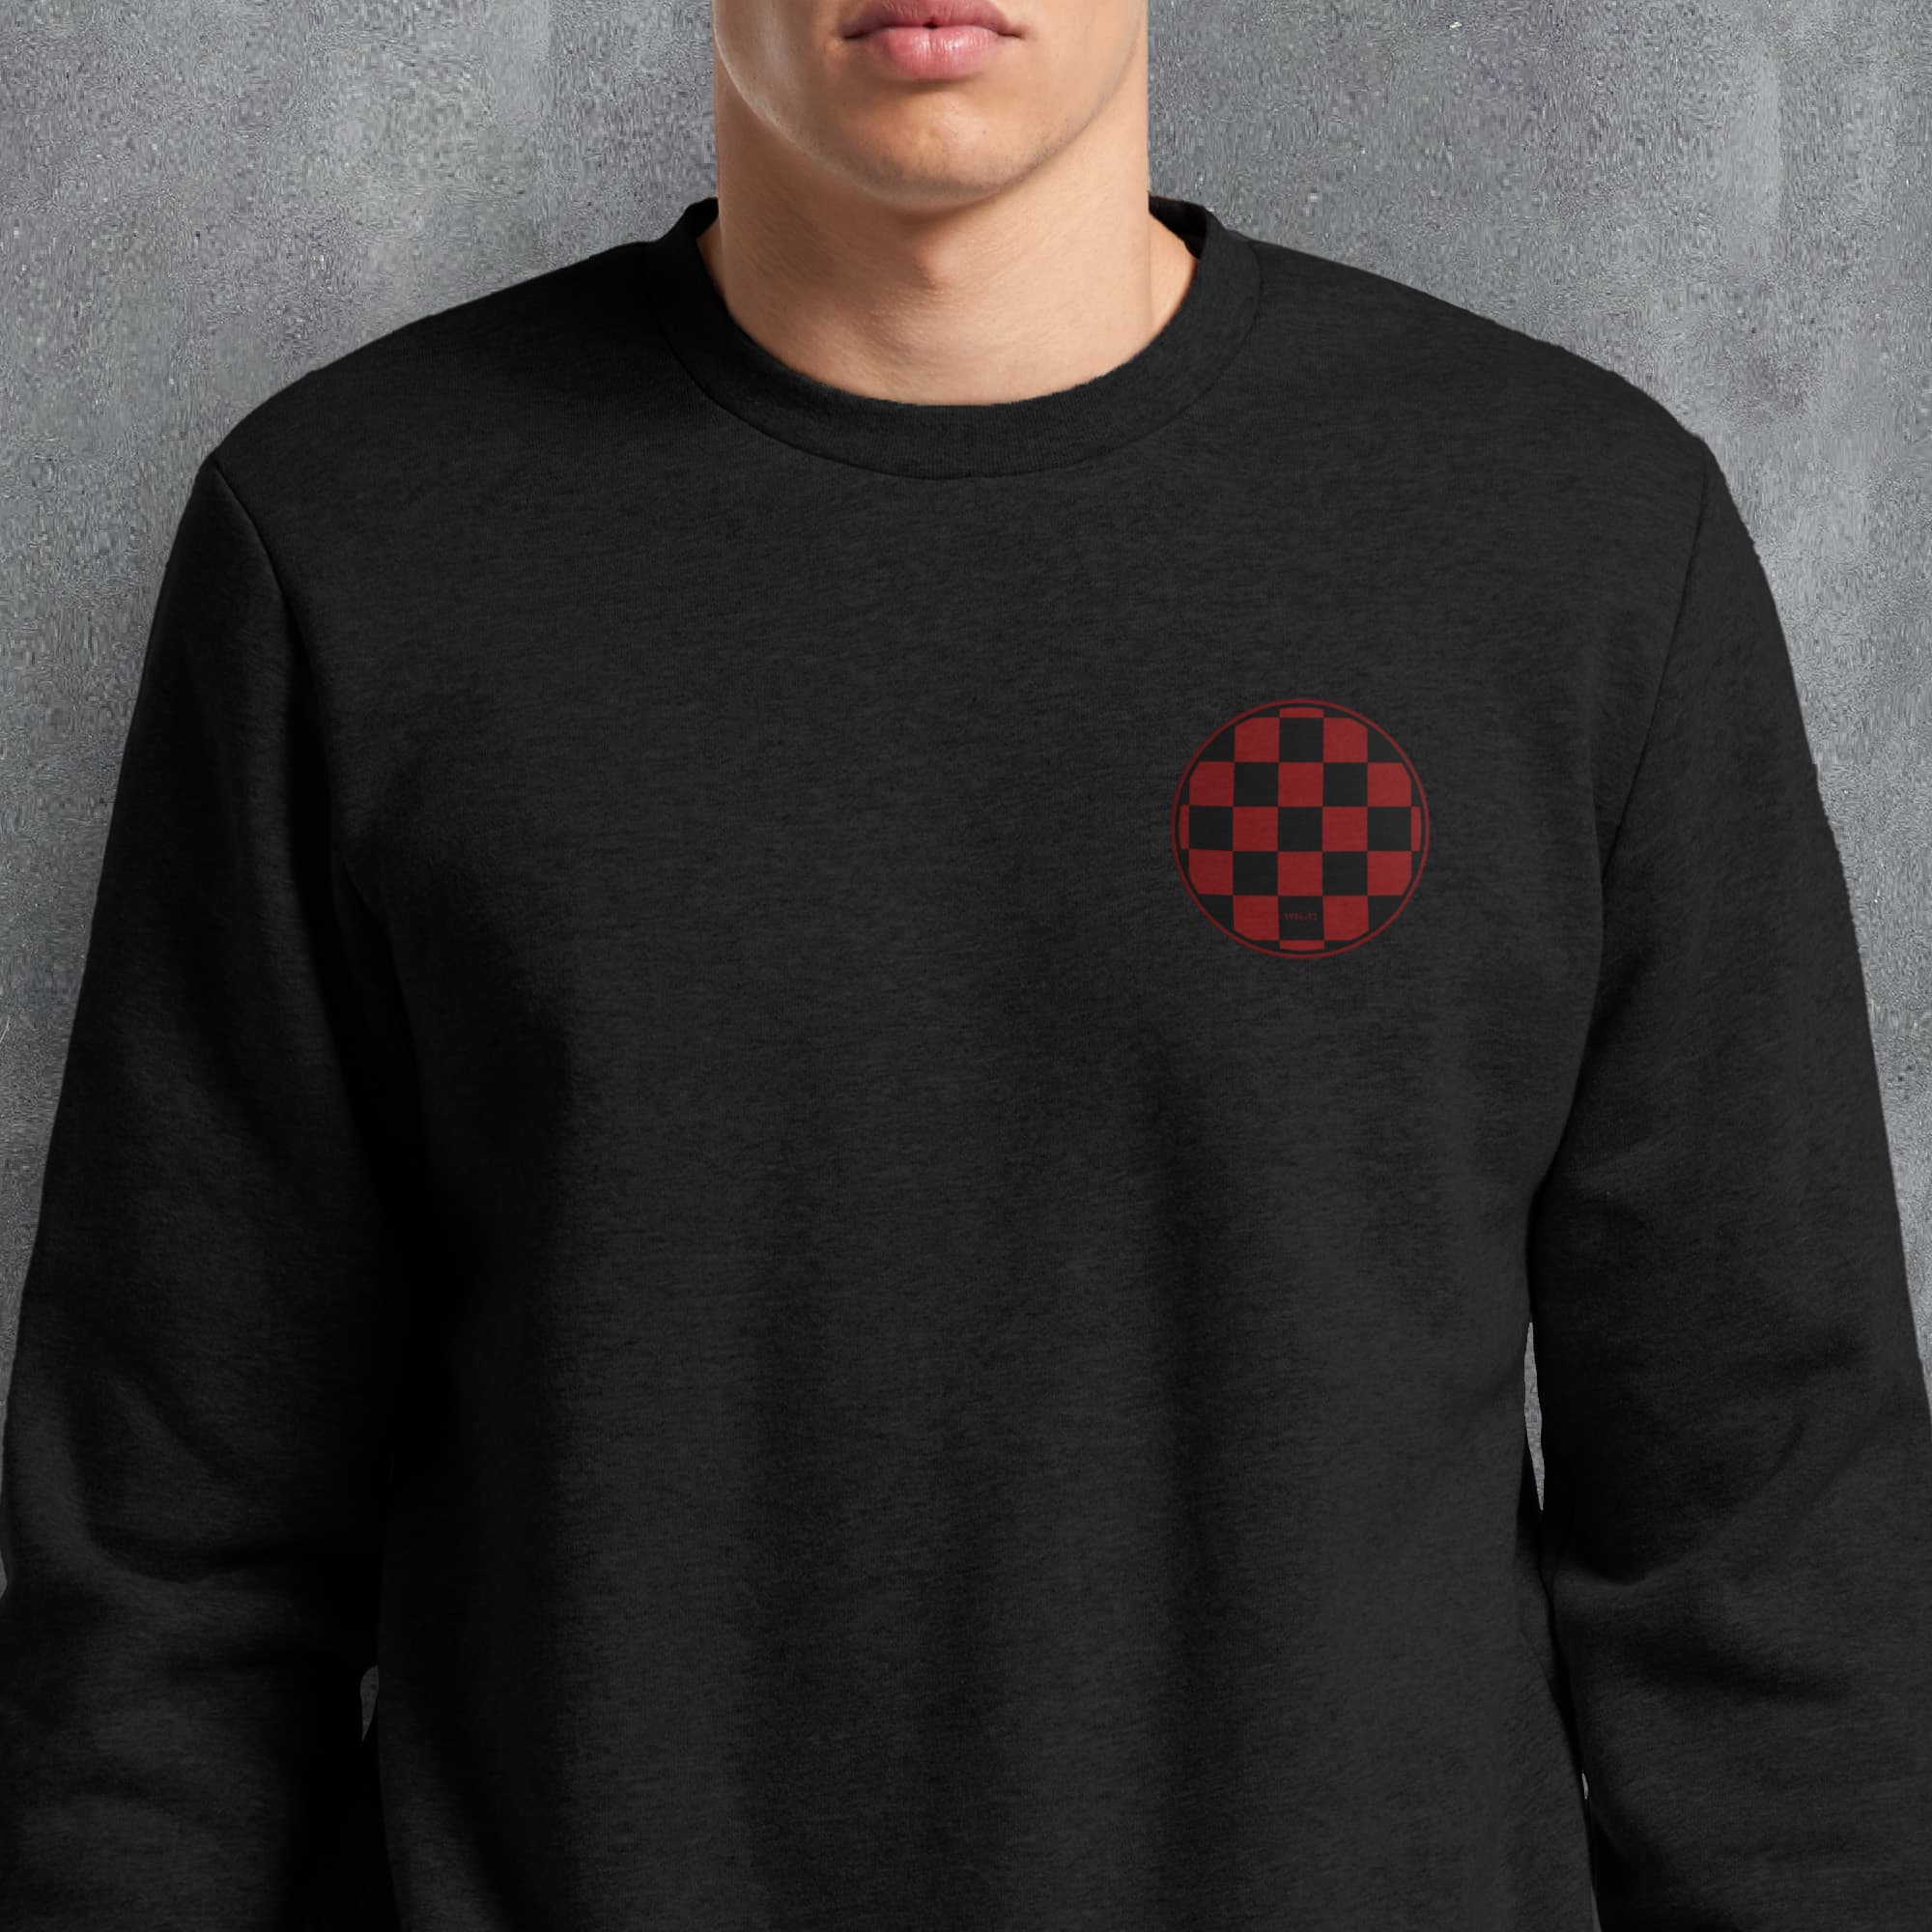 a man wearing a black sweatshirt with a red checkered pocket